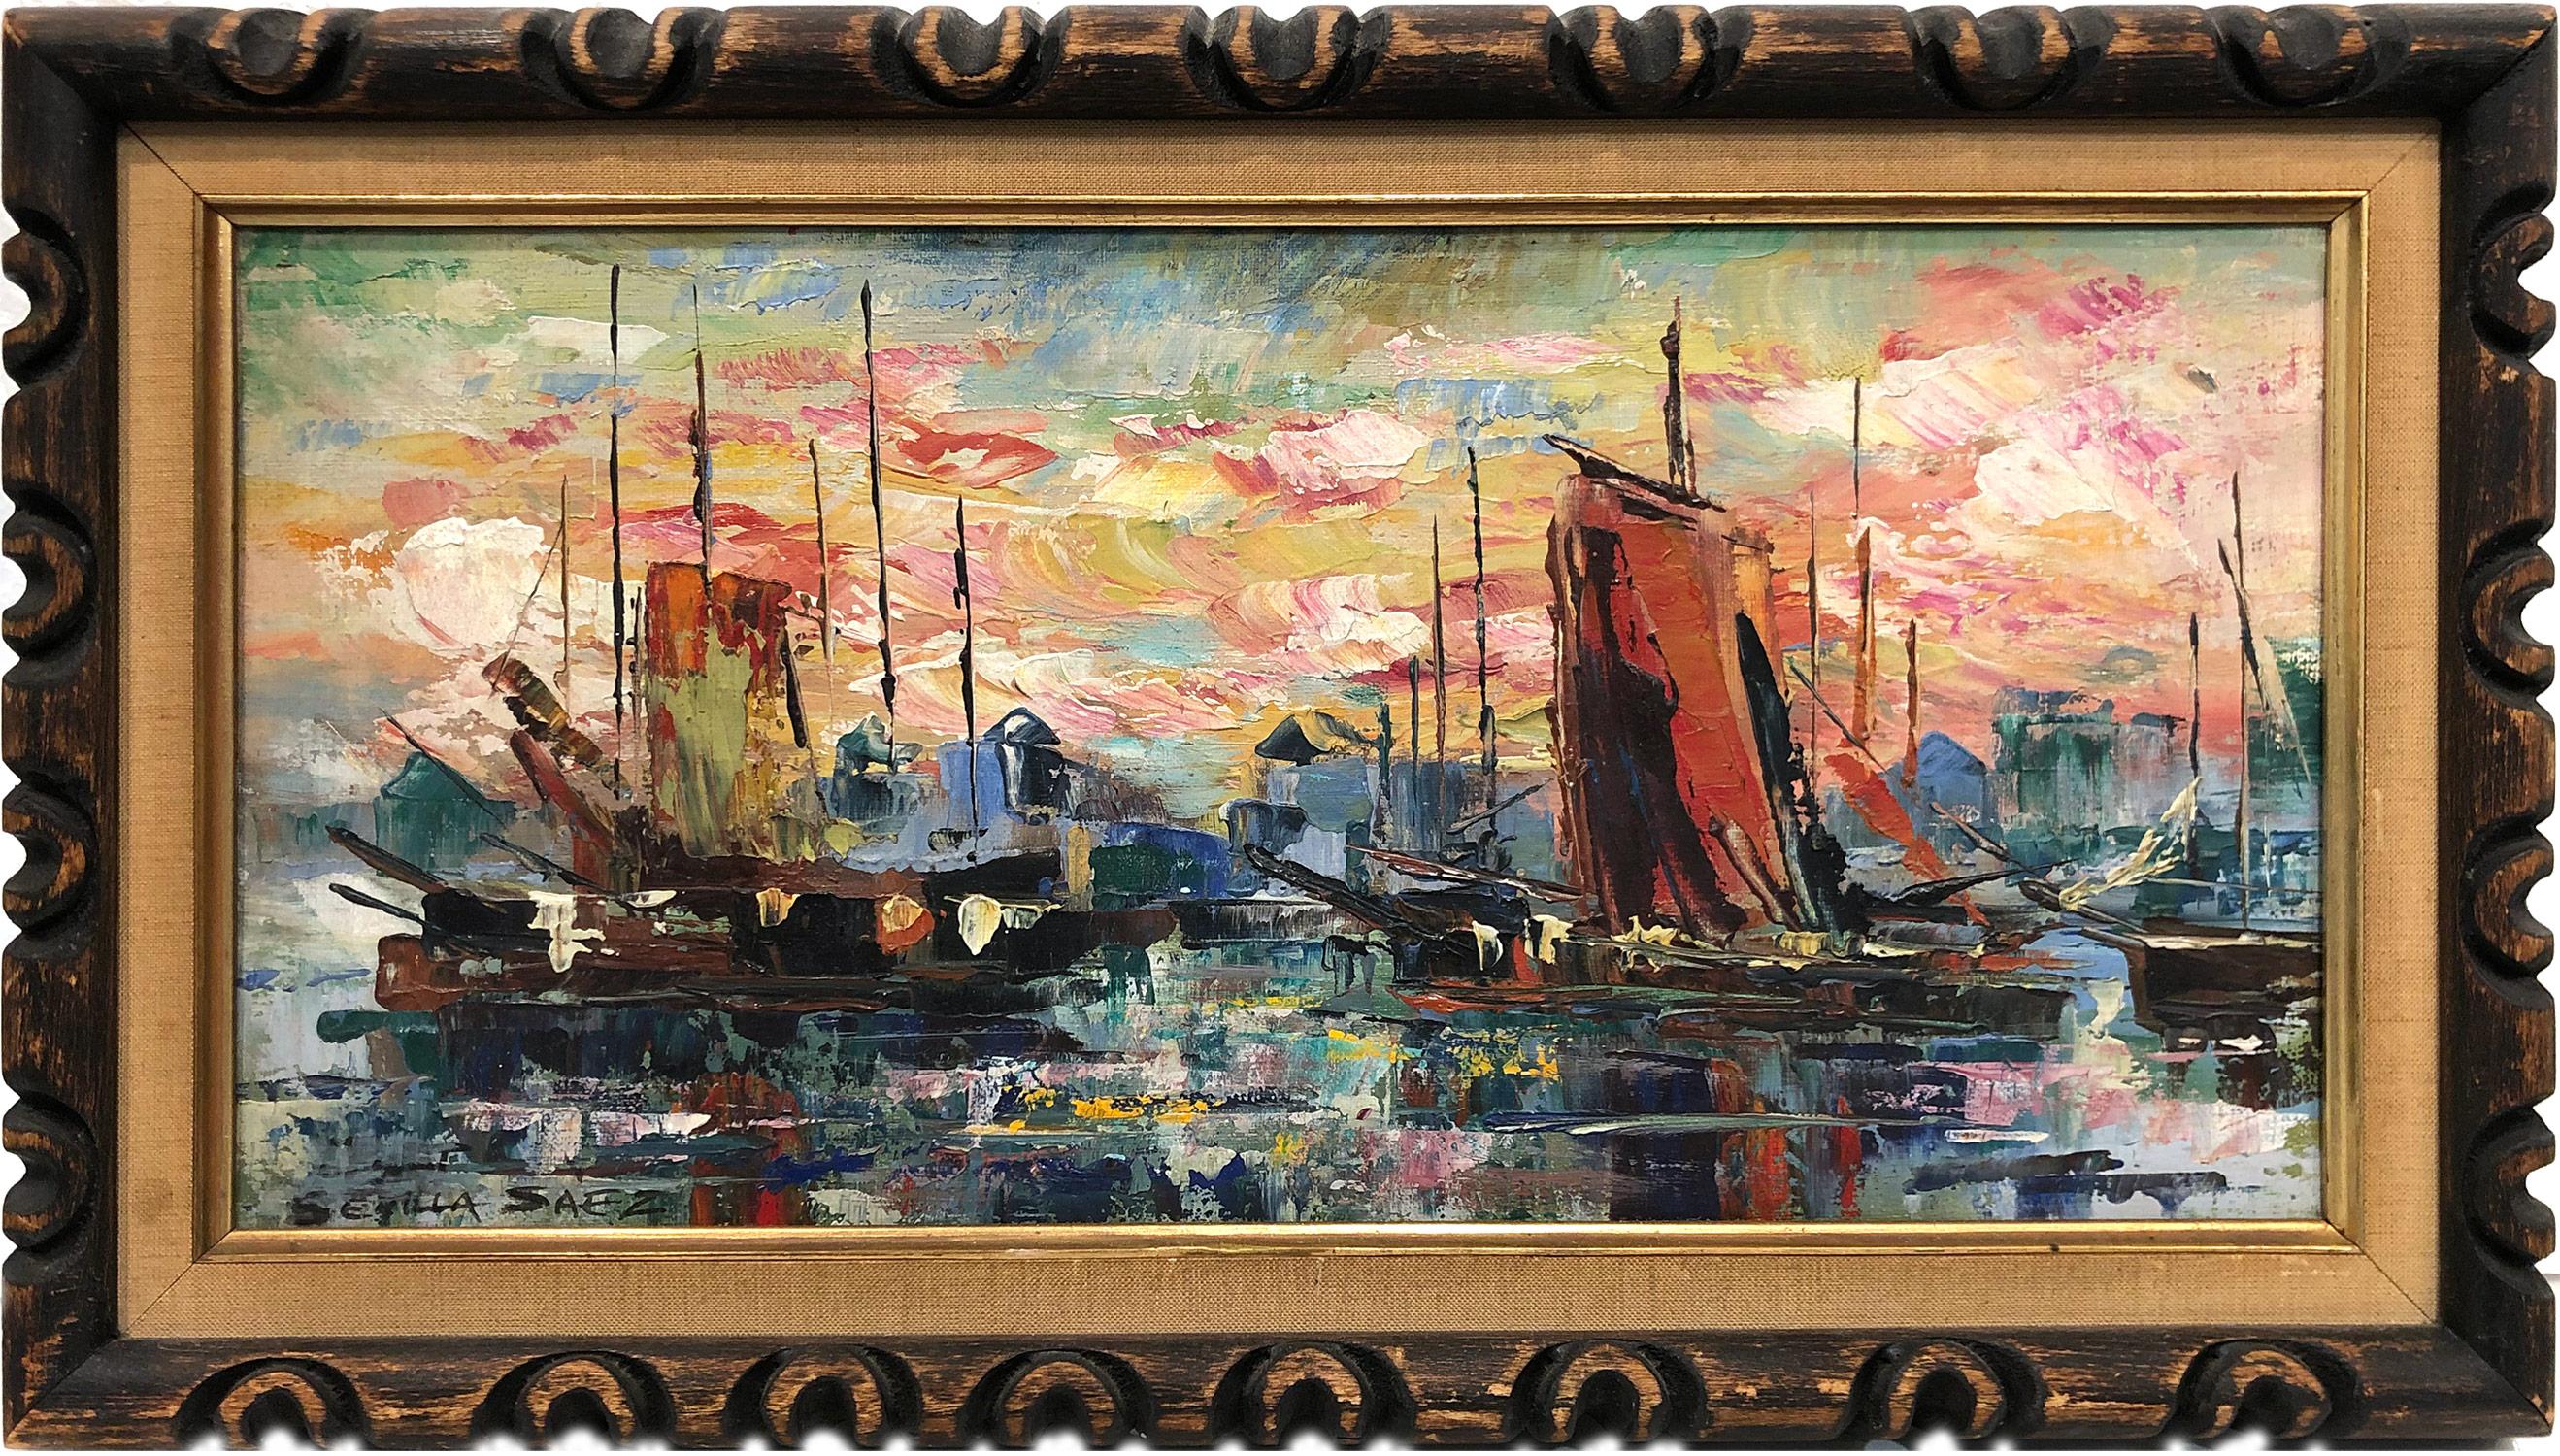 Juan Sevilla Saez Landscape Painting - "Coastal Seascape with Sailboats" Abstract Multicolored Mid-Century Oil Painting